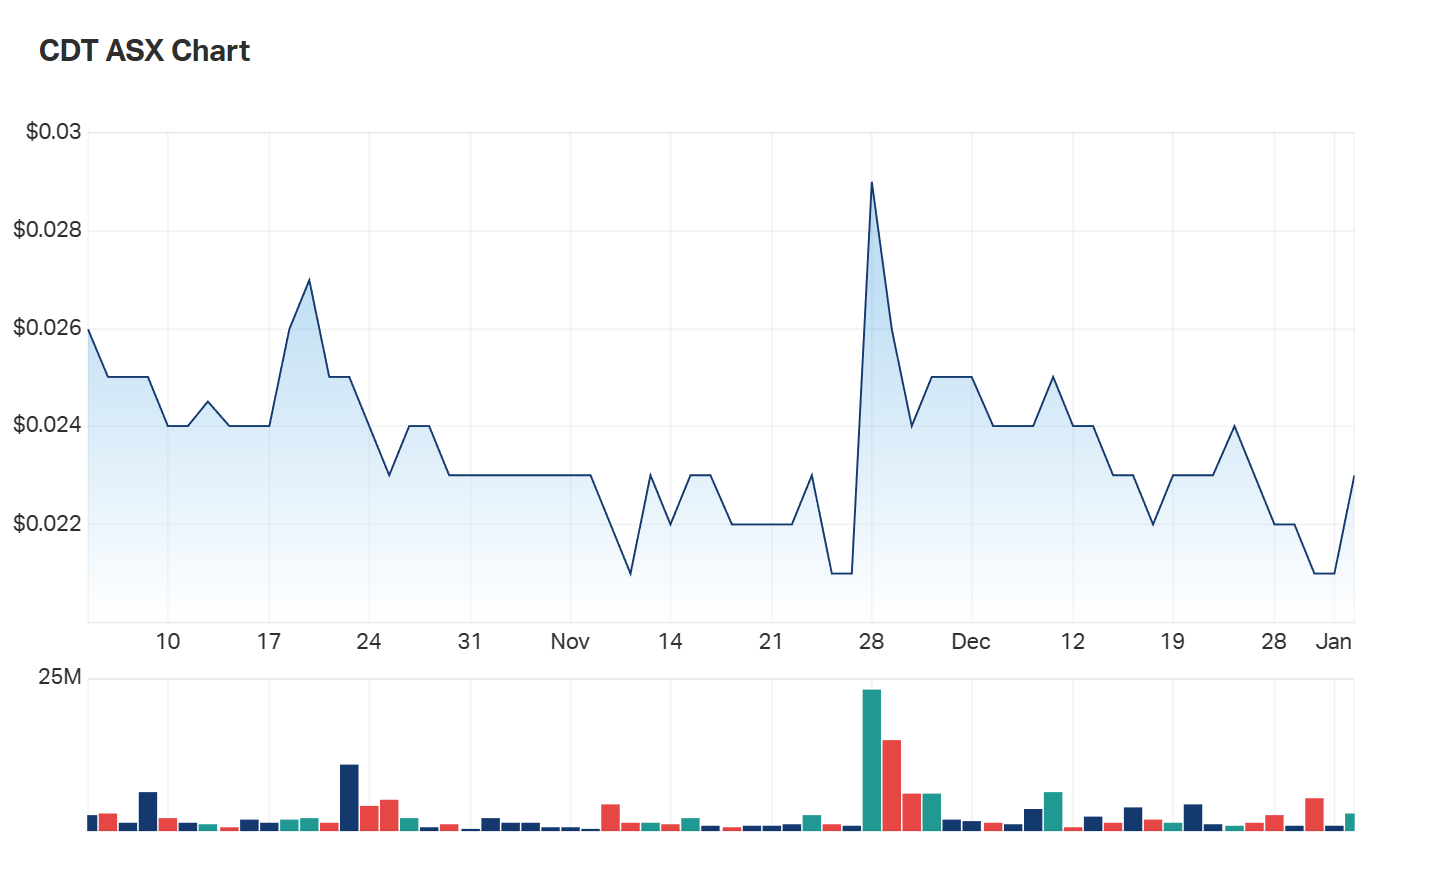 Castle Minerals' three month charts 